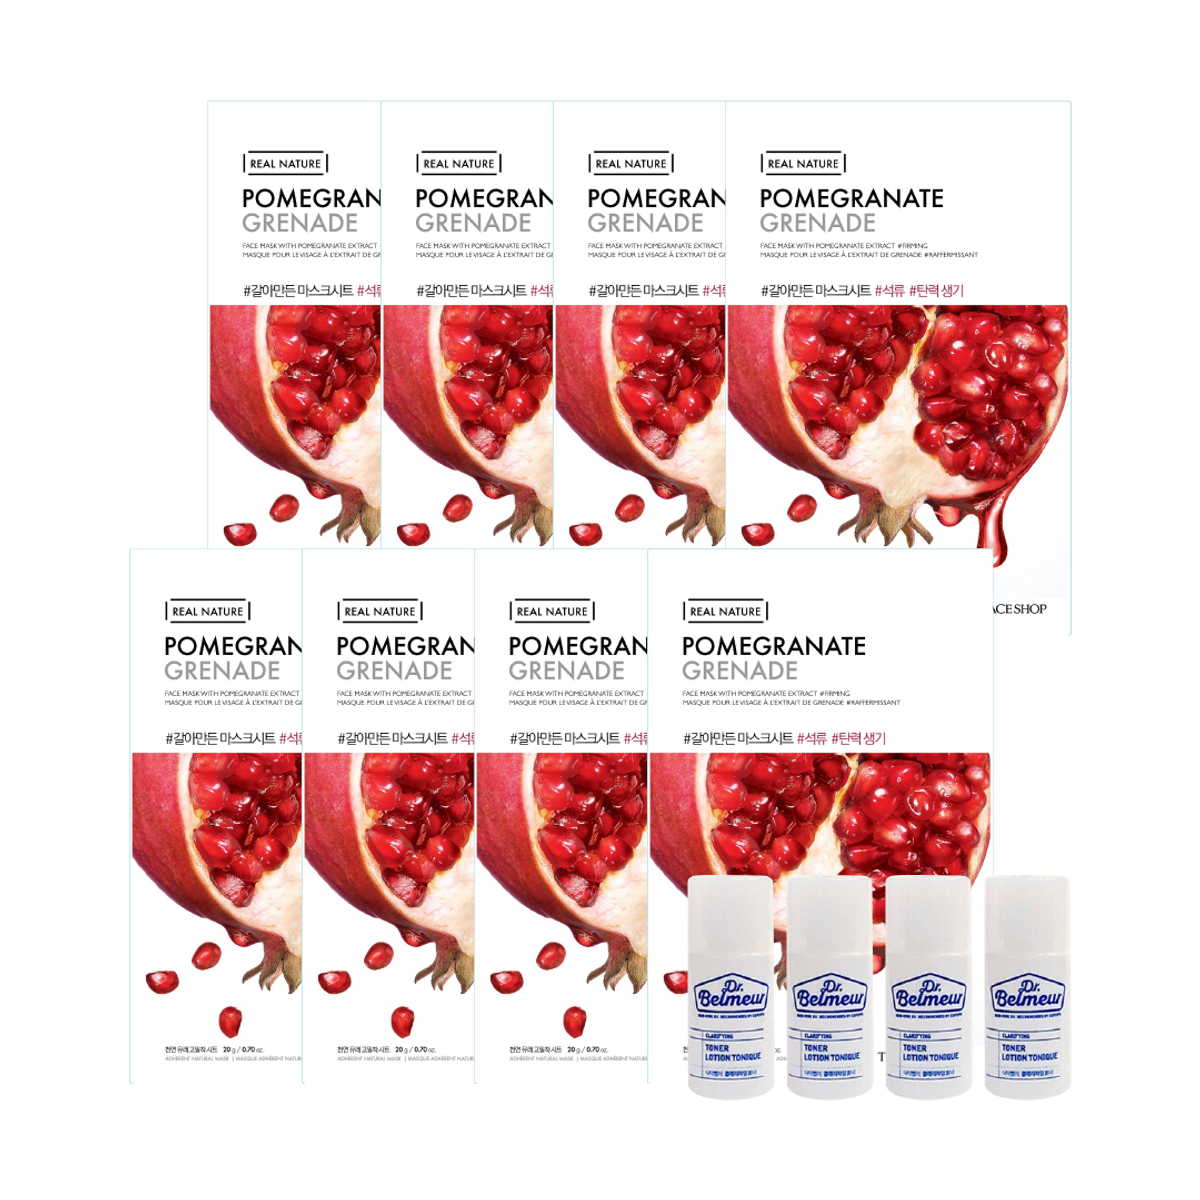 gift-combo-nuoc-can-bang-dr-belmeur-mat-na-real-nature-pomegranate-face-1